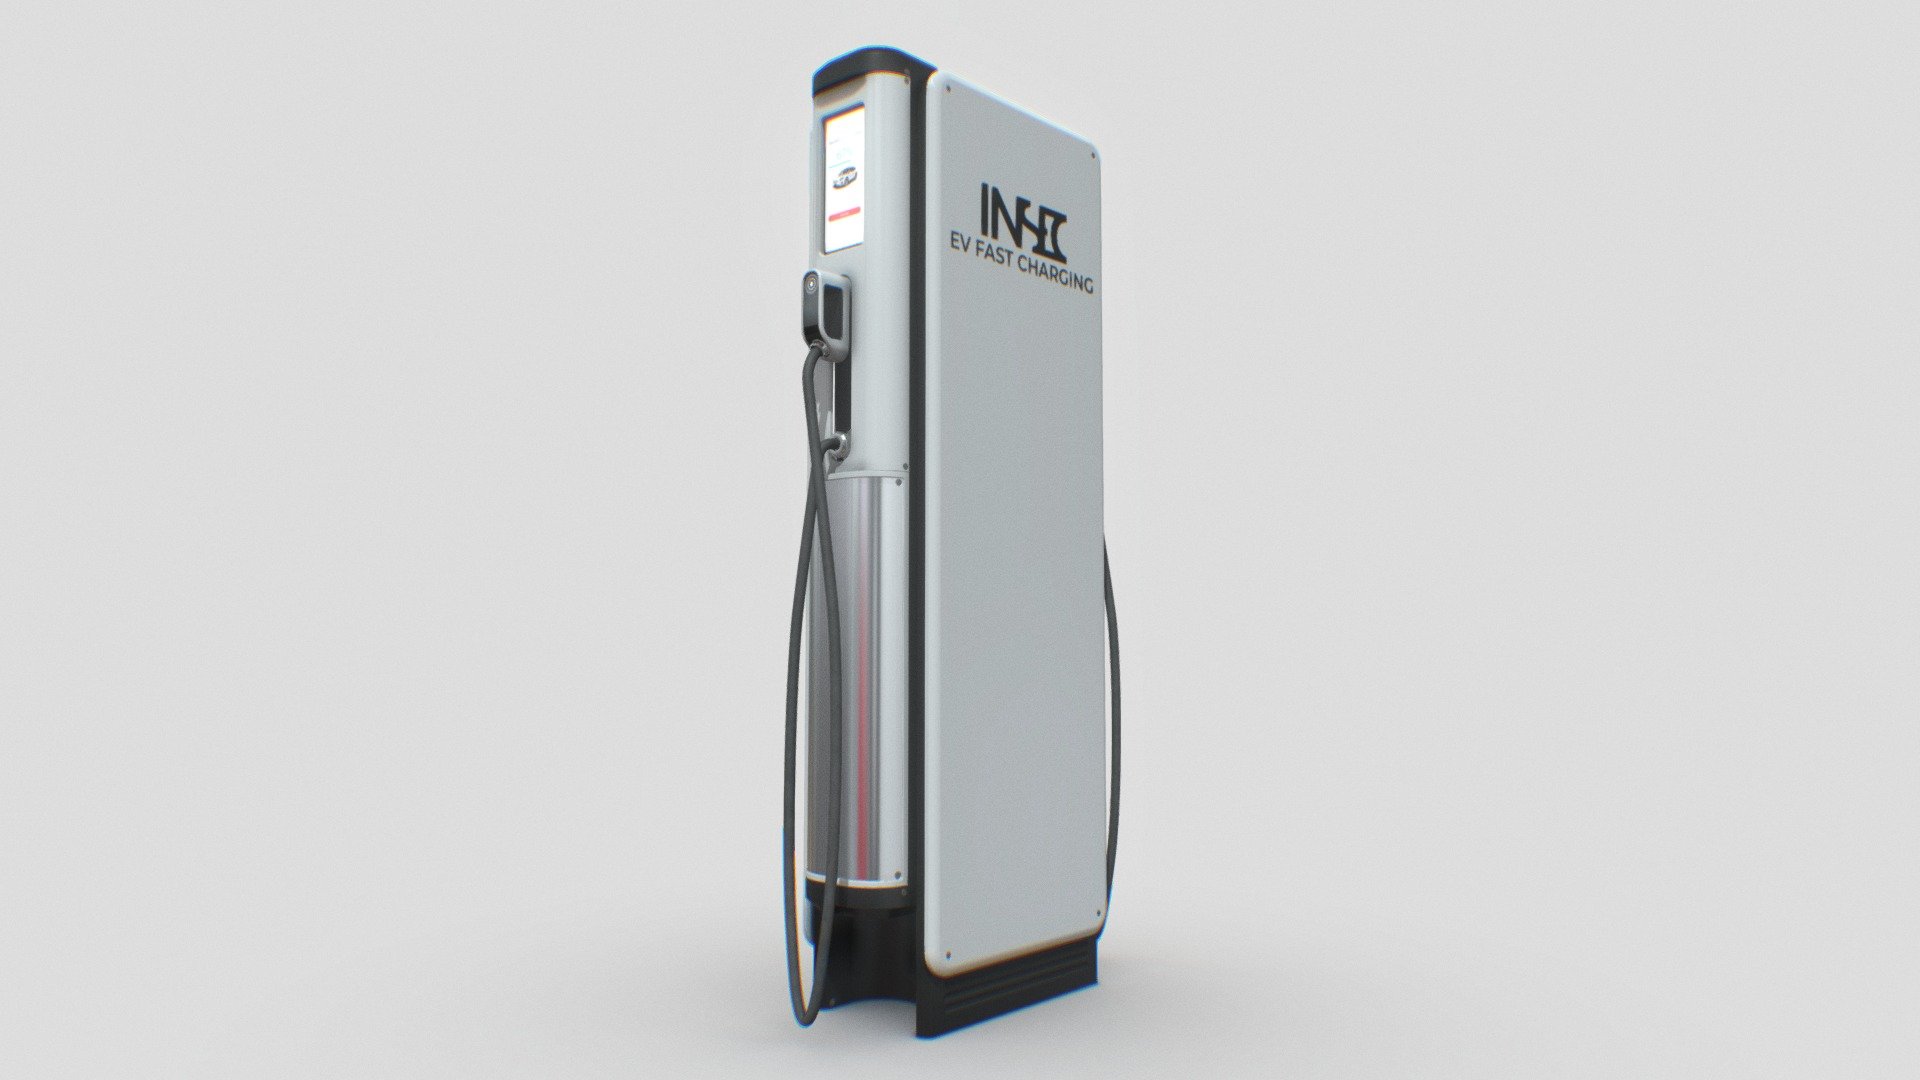 EV fast charging station

This model I made it with Blender. I made it with actual size reference.
I include some file format (exported from Blender),texture, some sample render and also I include the lighting setup on the Blender file. 
Hopefully you enjoy it. 
Or, you can edit my model with your preferense easily.

Please like and share if you enjoy it 3d model